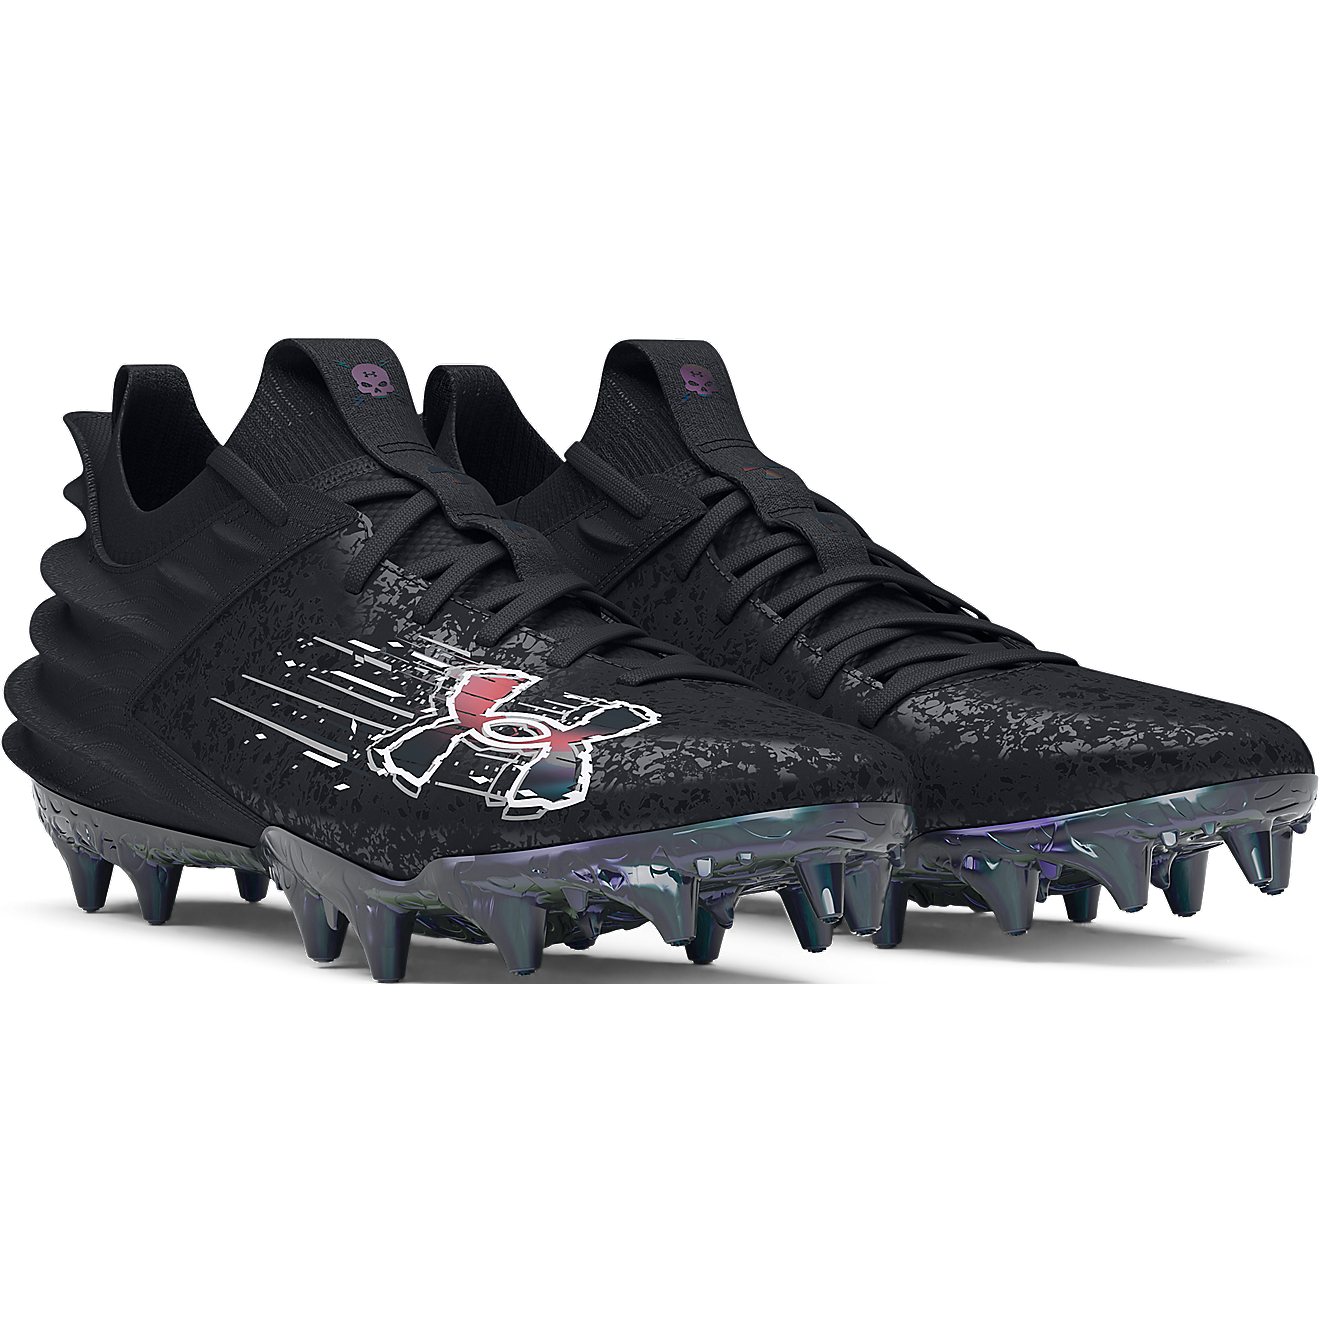 Under Armour Men's Blur Smoke Suede 2.0 MC Football Cleats                                                                       - view number 3